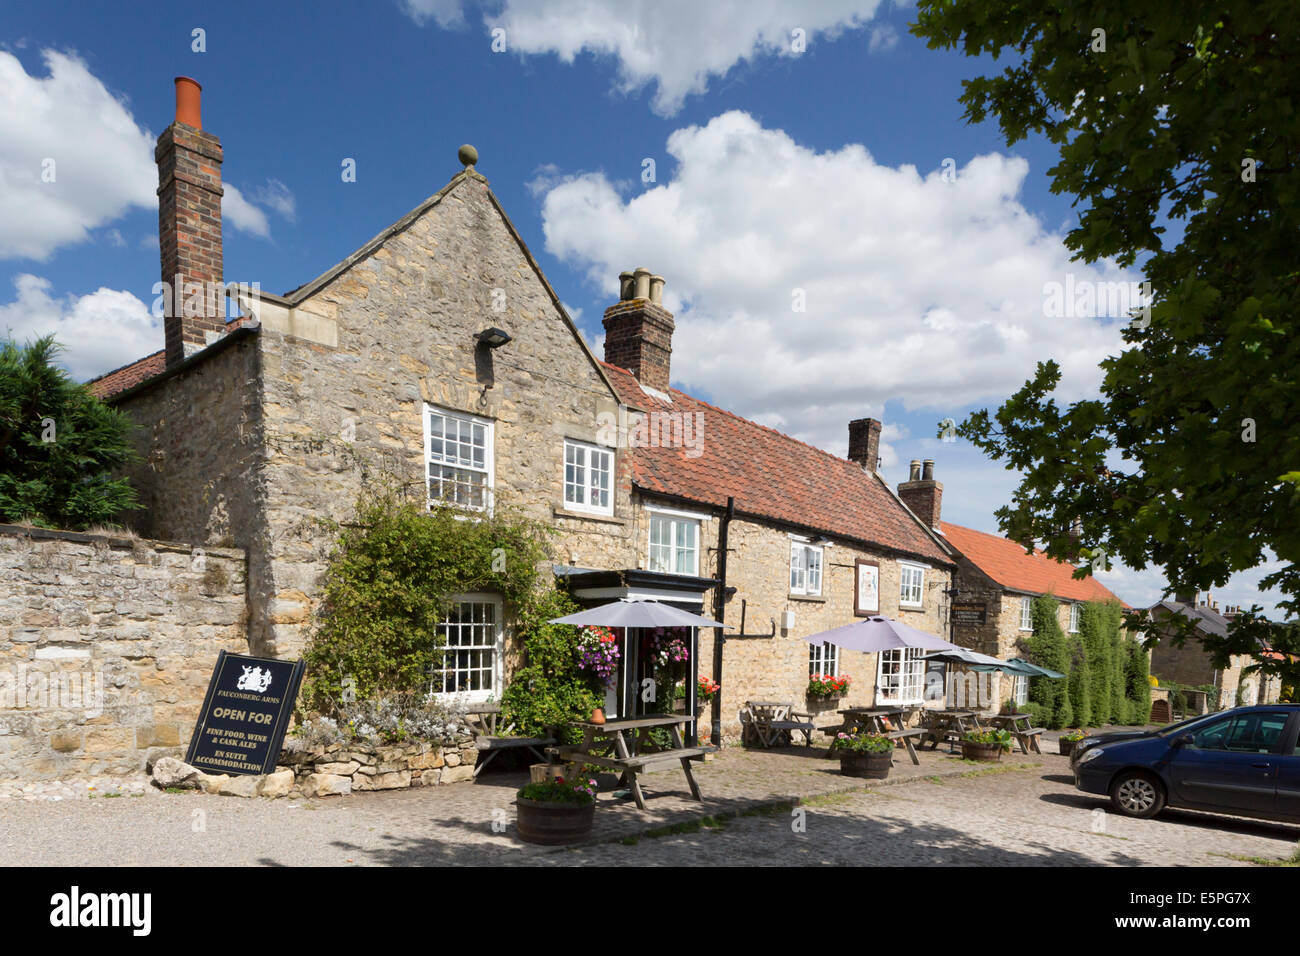 The Fauconberb Arms Inn at Coxwold village in North Yorkshire Stock Photo